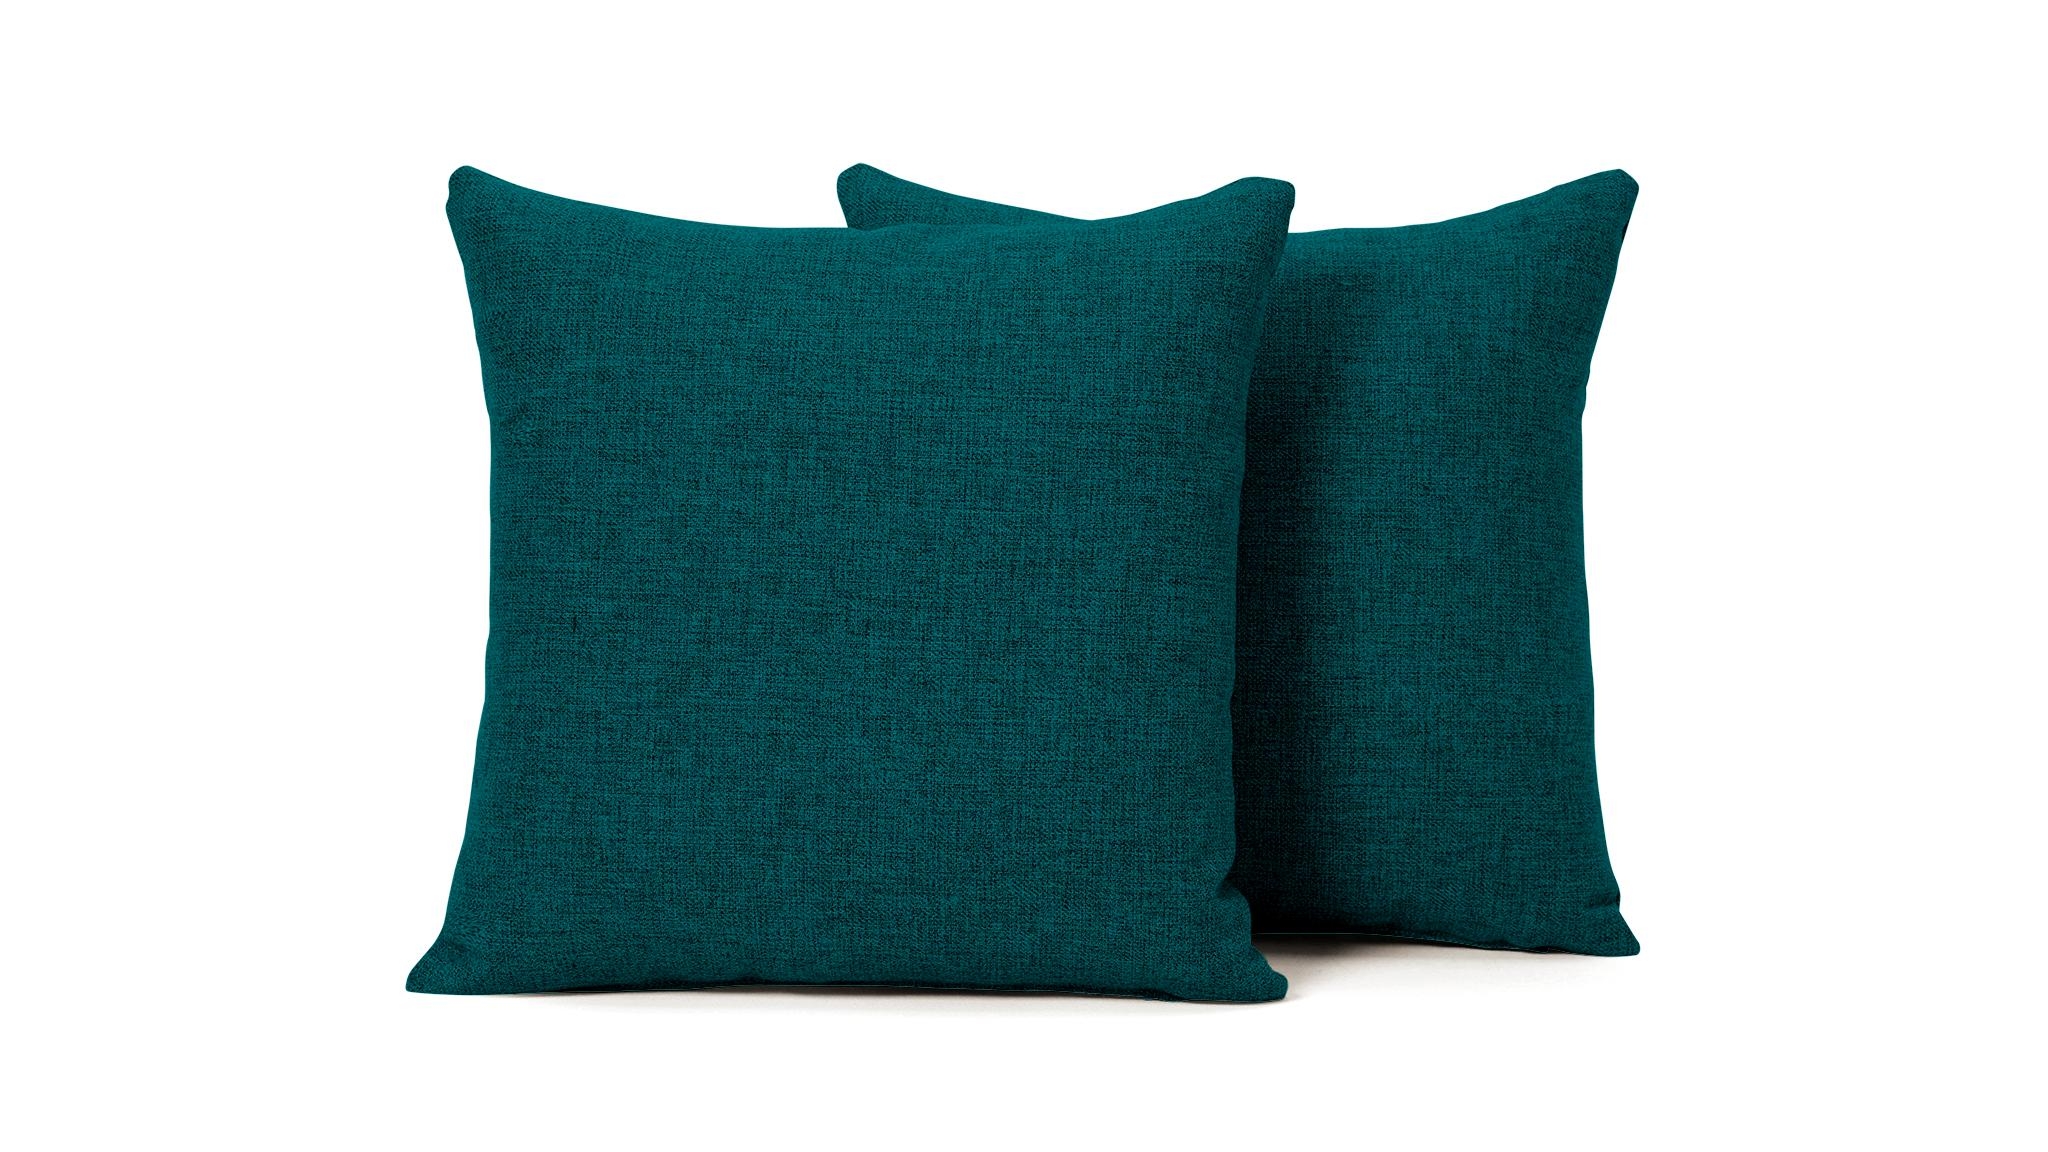 Blue Decorative Mid Century Modern Knife Edge Pillows 18 x 18 (Set of 2) - Lucky Turquoise - Image 0